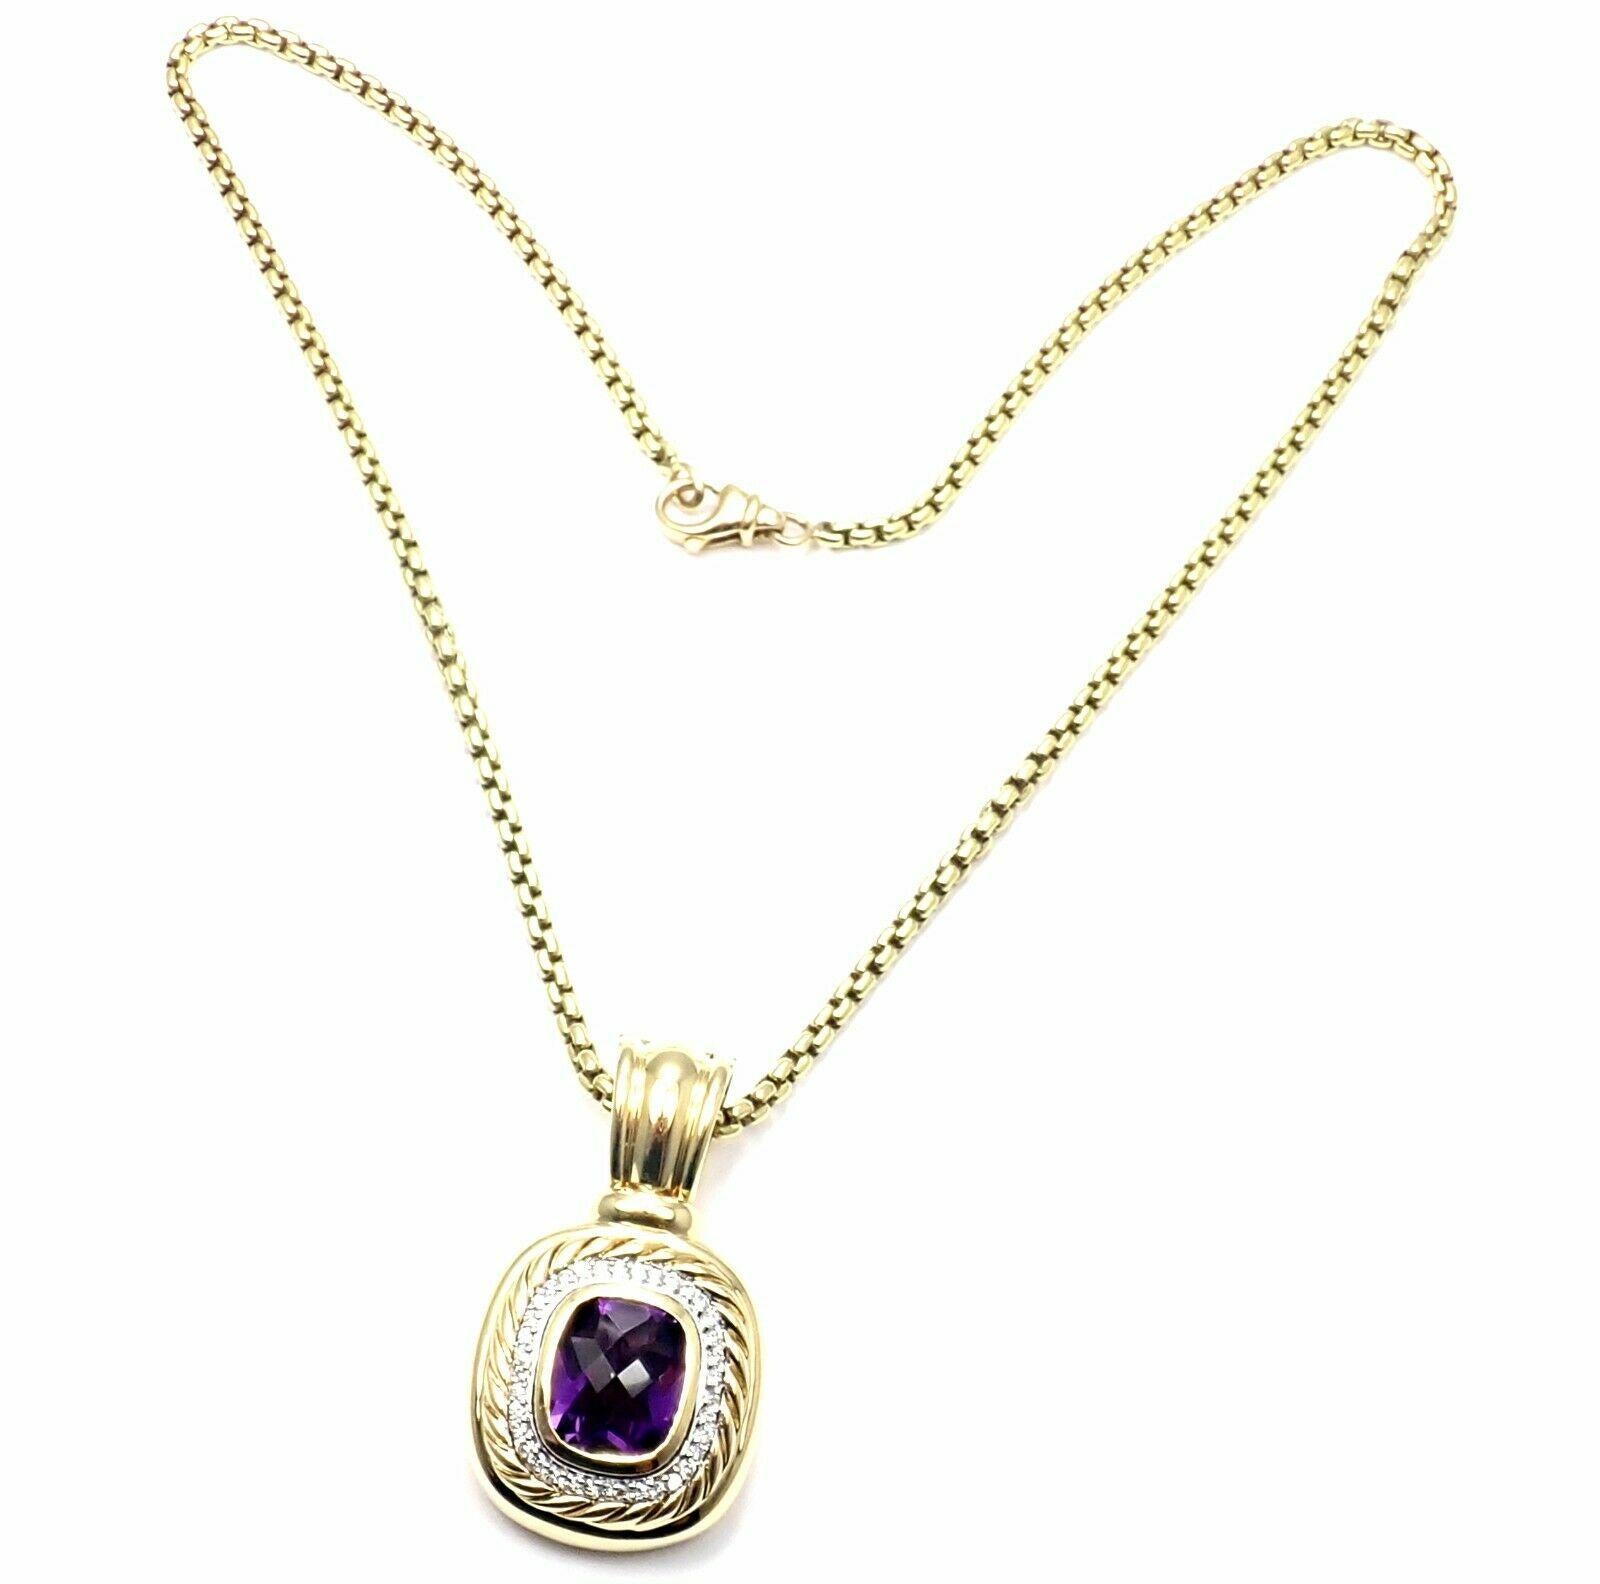 18k Yellow Gold Diamond Amethyst Large Cable Pendant Chain Necklace by David Yurman.
With 33 round brilliant cut diamonds SI1 clarity, G color total weight approximately  1ct
1 Large Amethyst: 10mm x 12mm
Details:
Chain: Length: 16